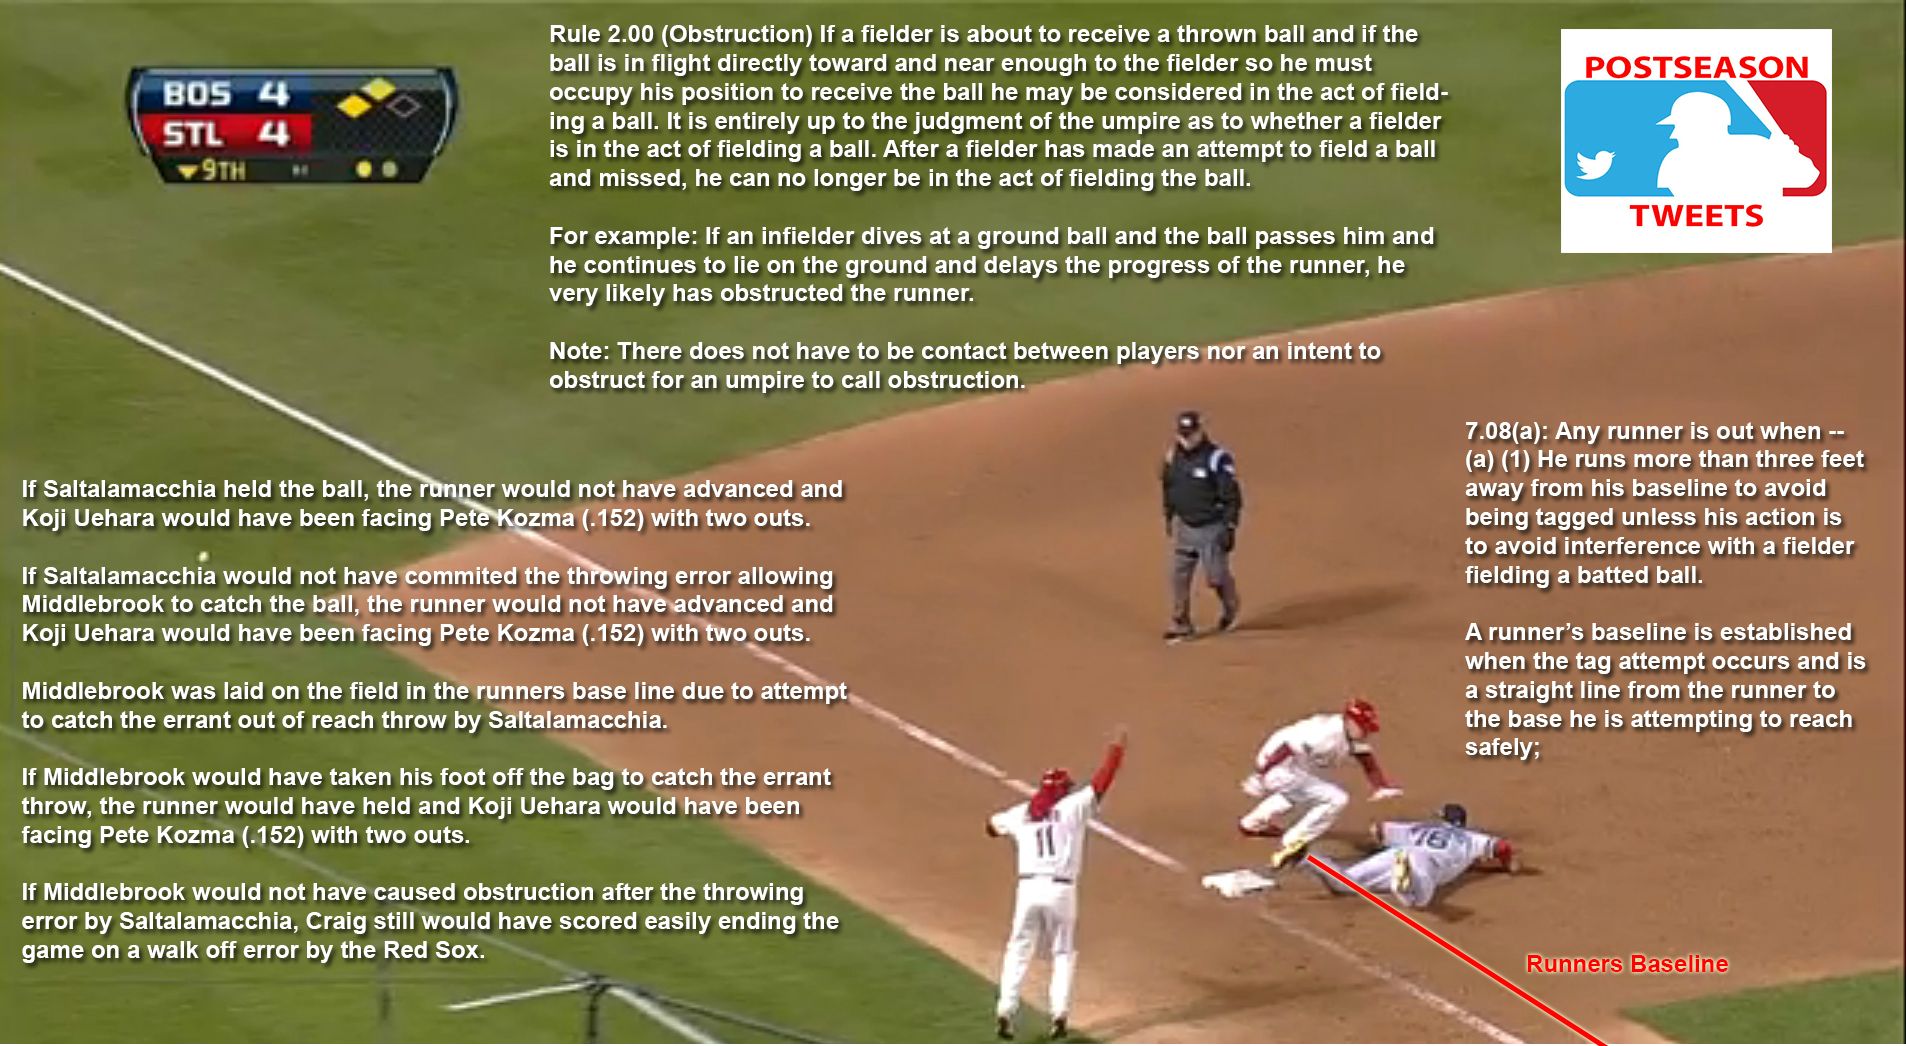 Here’s that MLB Obstruction rule explained